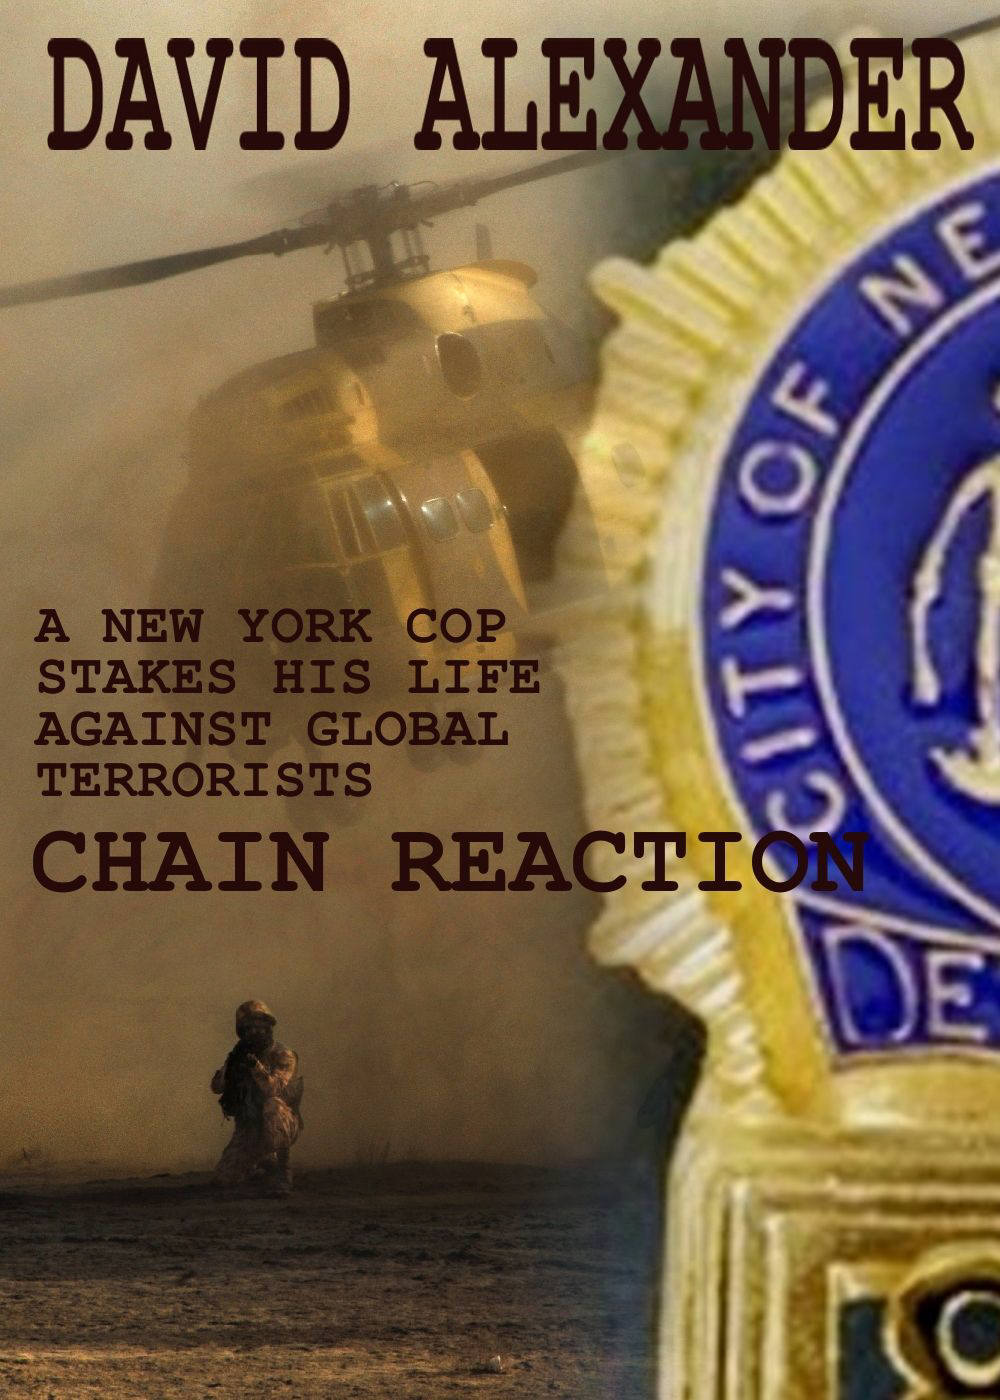 CHAIN REACTION  by David Alexander, internationally acclaimed novelist and prizewinning thriller author.